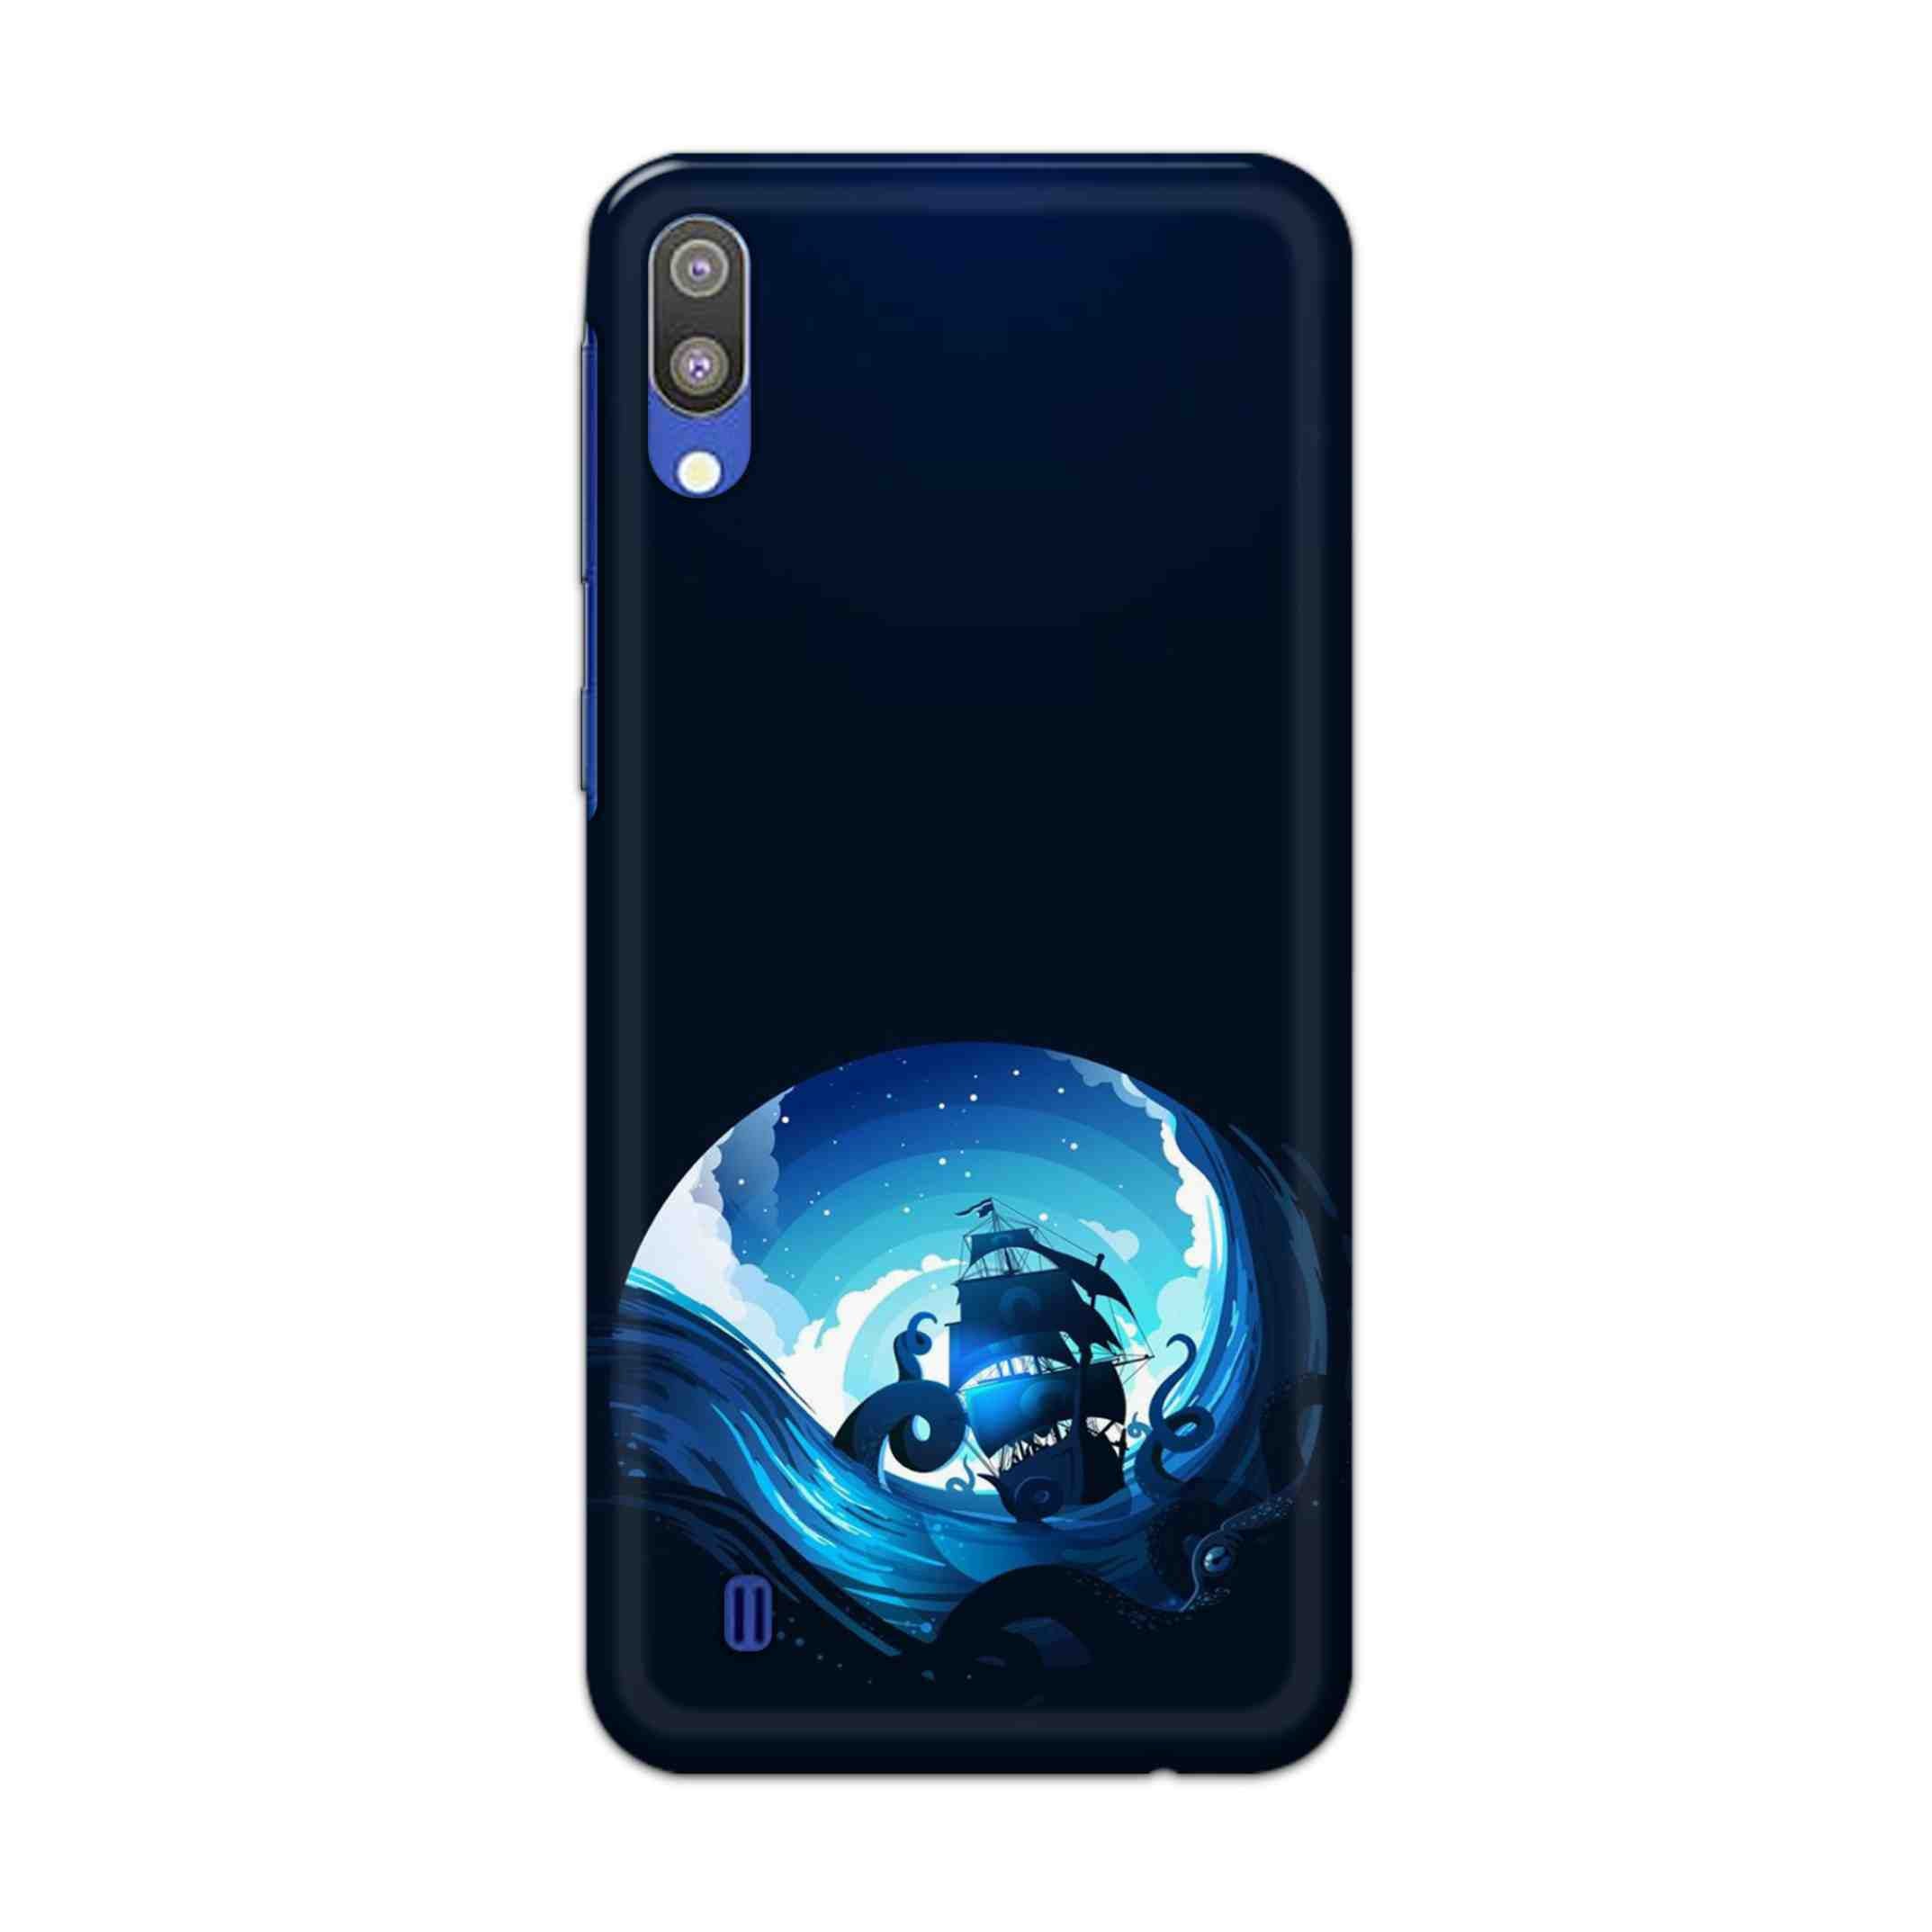 Buy Blue Sea Ship Hard Back Mobile Phone Case Cover For Samsung Galaxy M10 Online